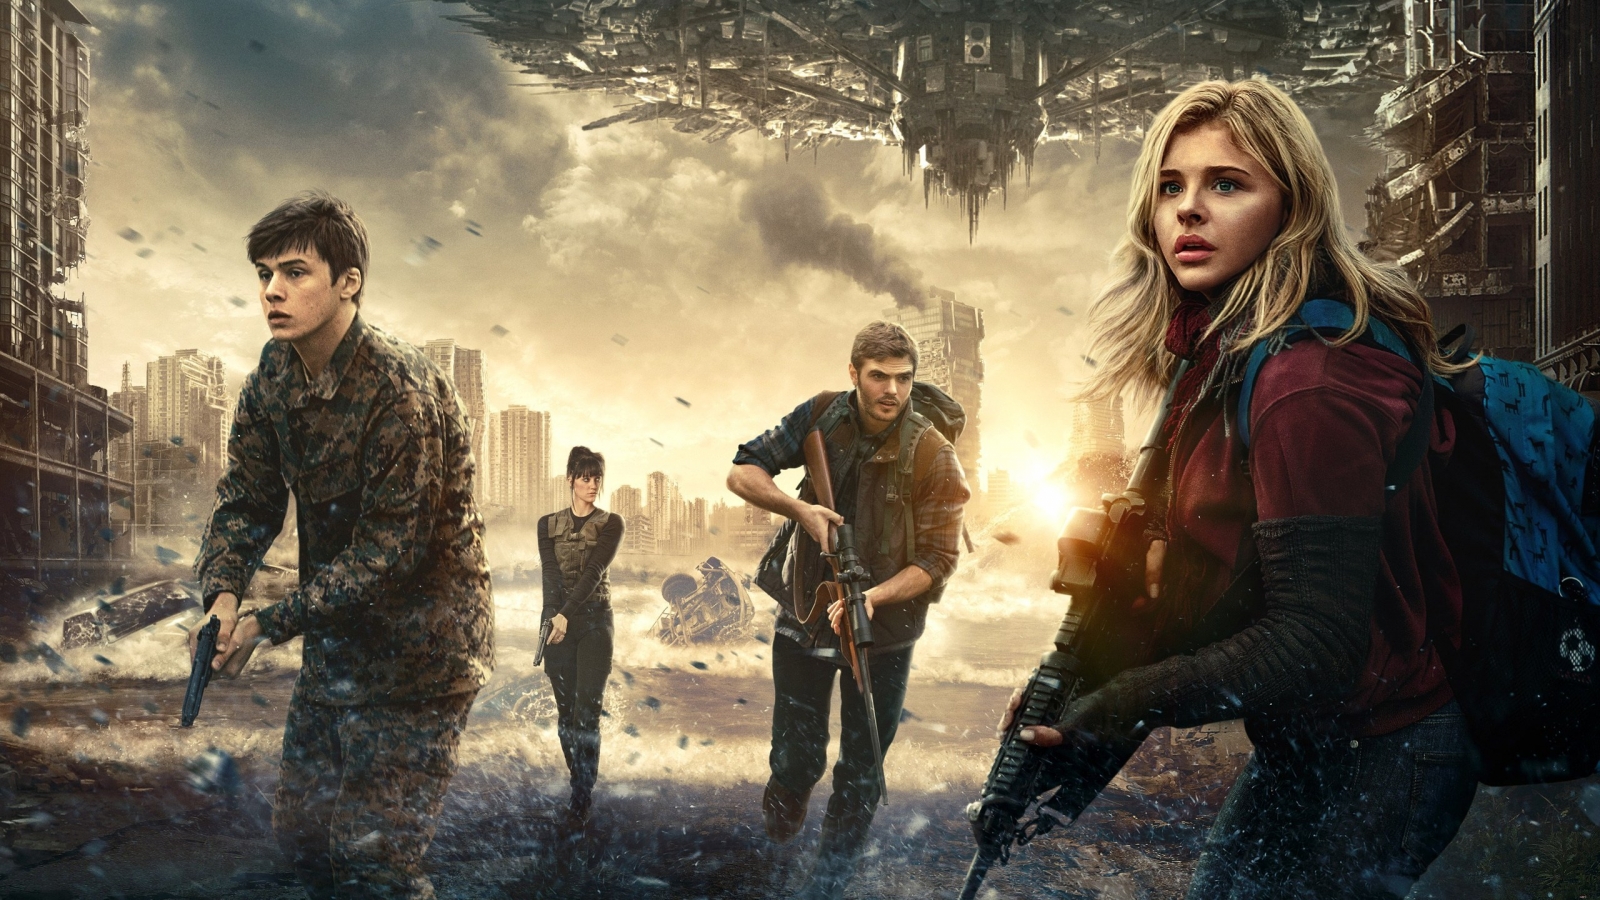 The 5th Wave Film 2016 for 1600 x 900 HDTV resolution